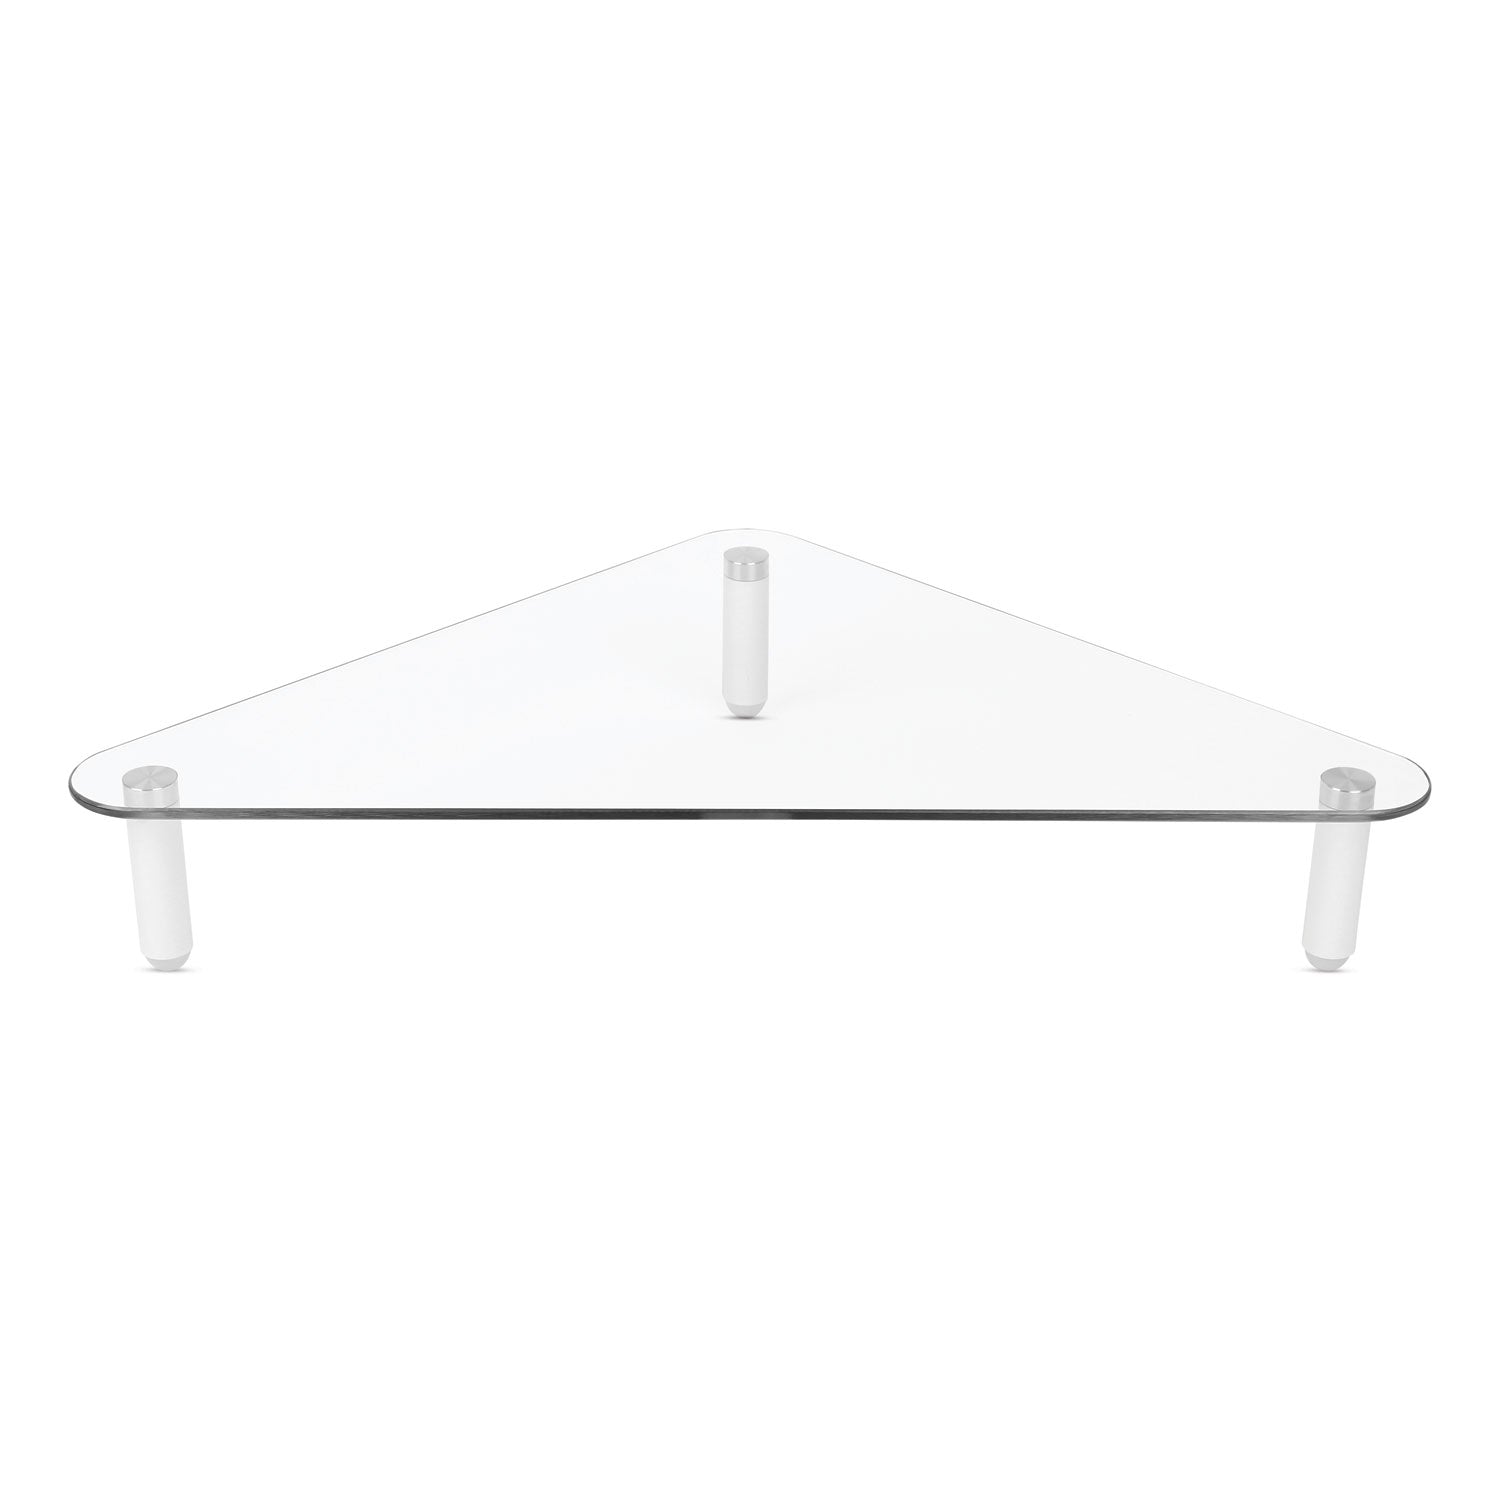 glass-corner-monitor-riser-197-x-11-x-325-clear-supports-40-lbs_ktkms390 - 1